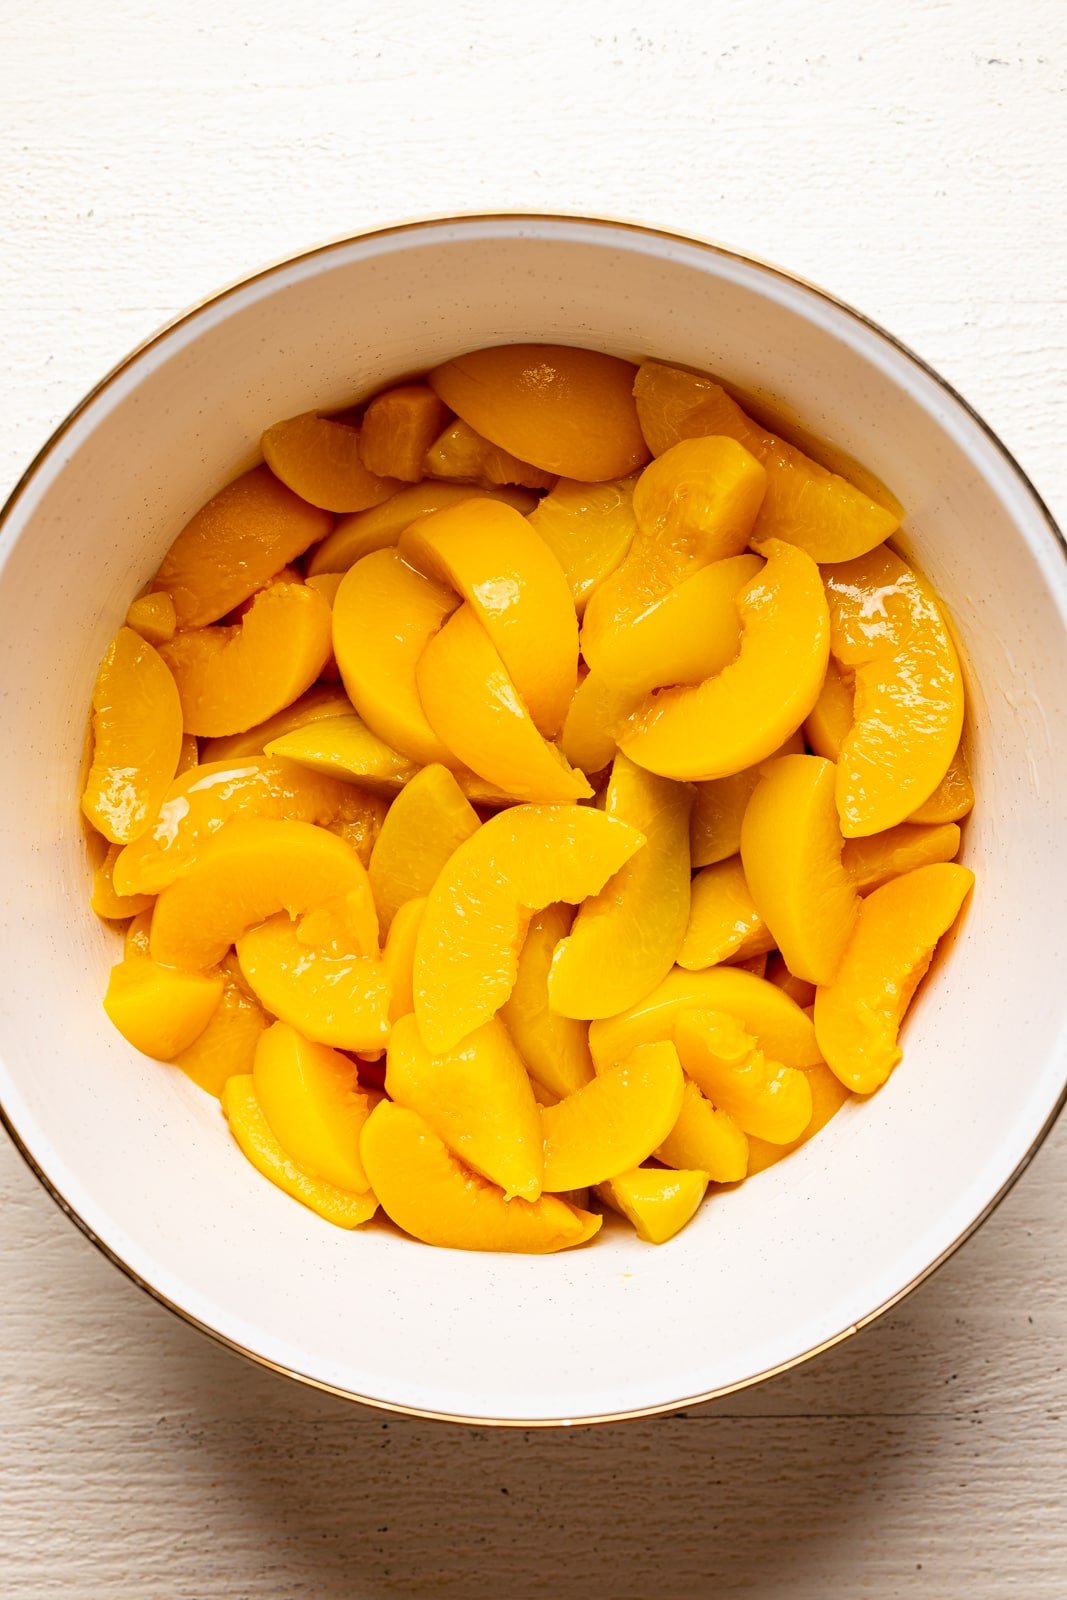 Peach slices in a large white bowl on a white wood table.